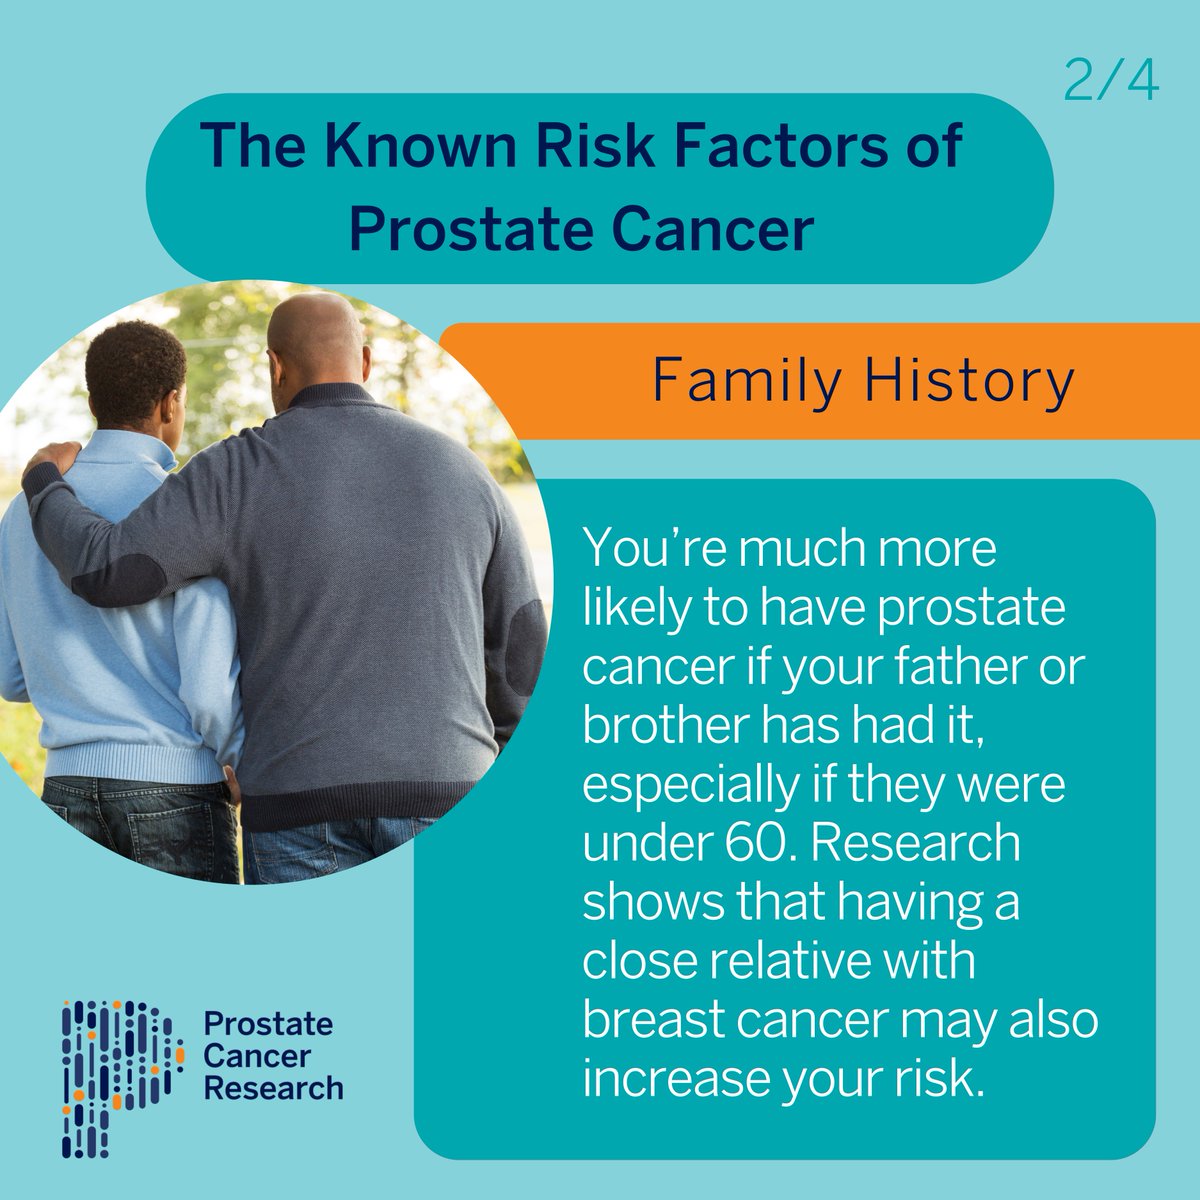 Visit the Patient Info section on our website to download our guide to the signs, symptoms and risk factors of prostate cancer: prostate-cancer-research.org.uk/patient-info/